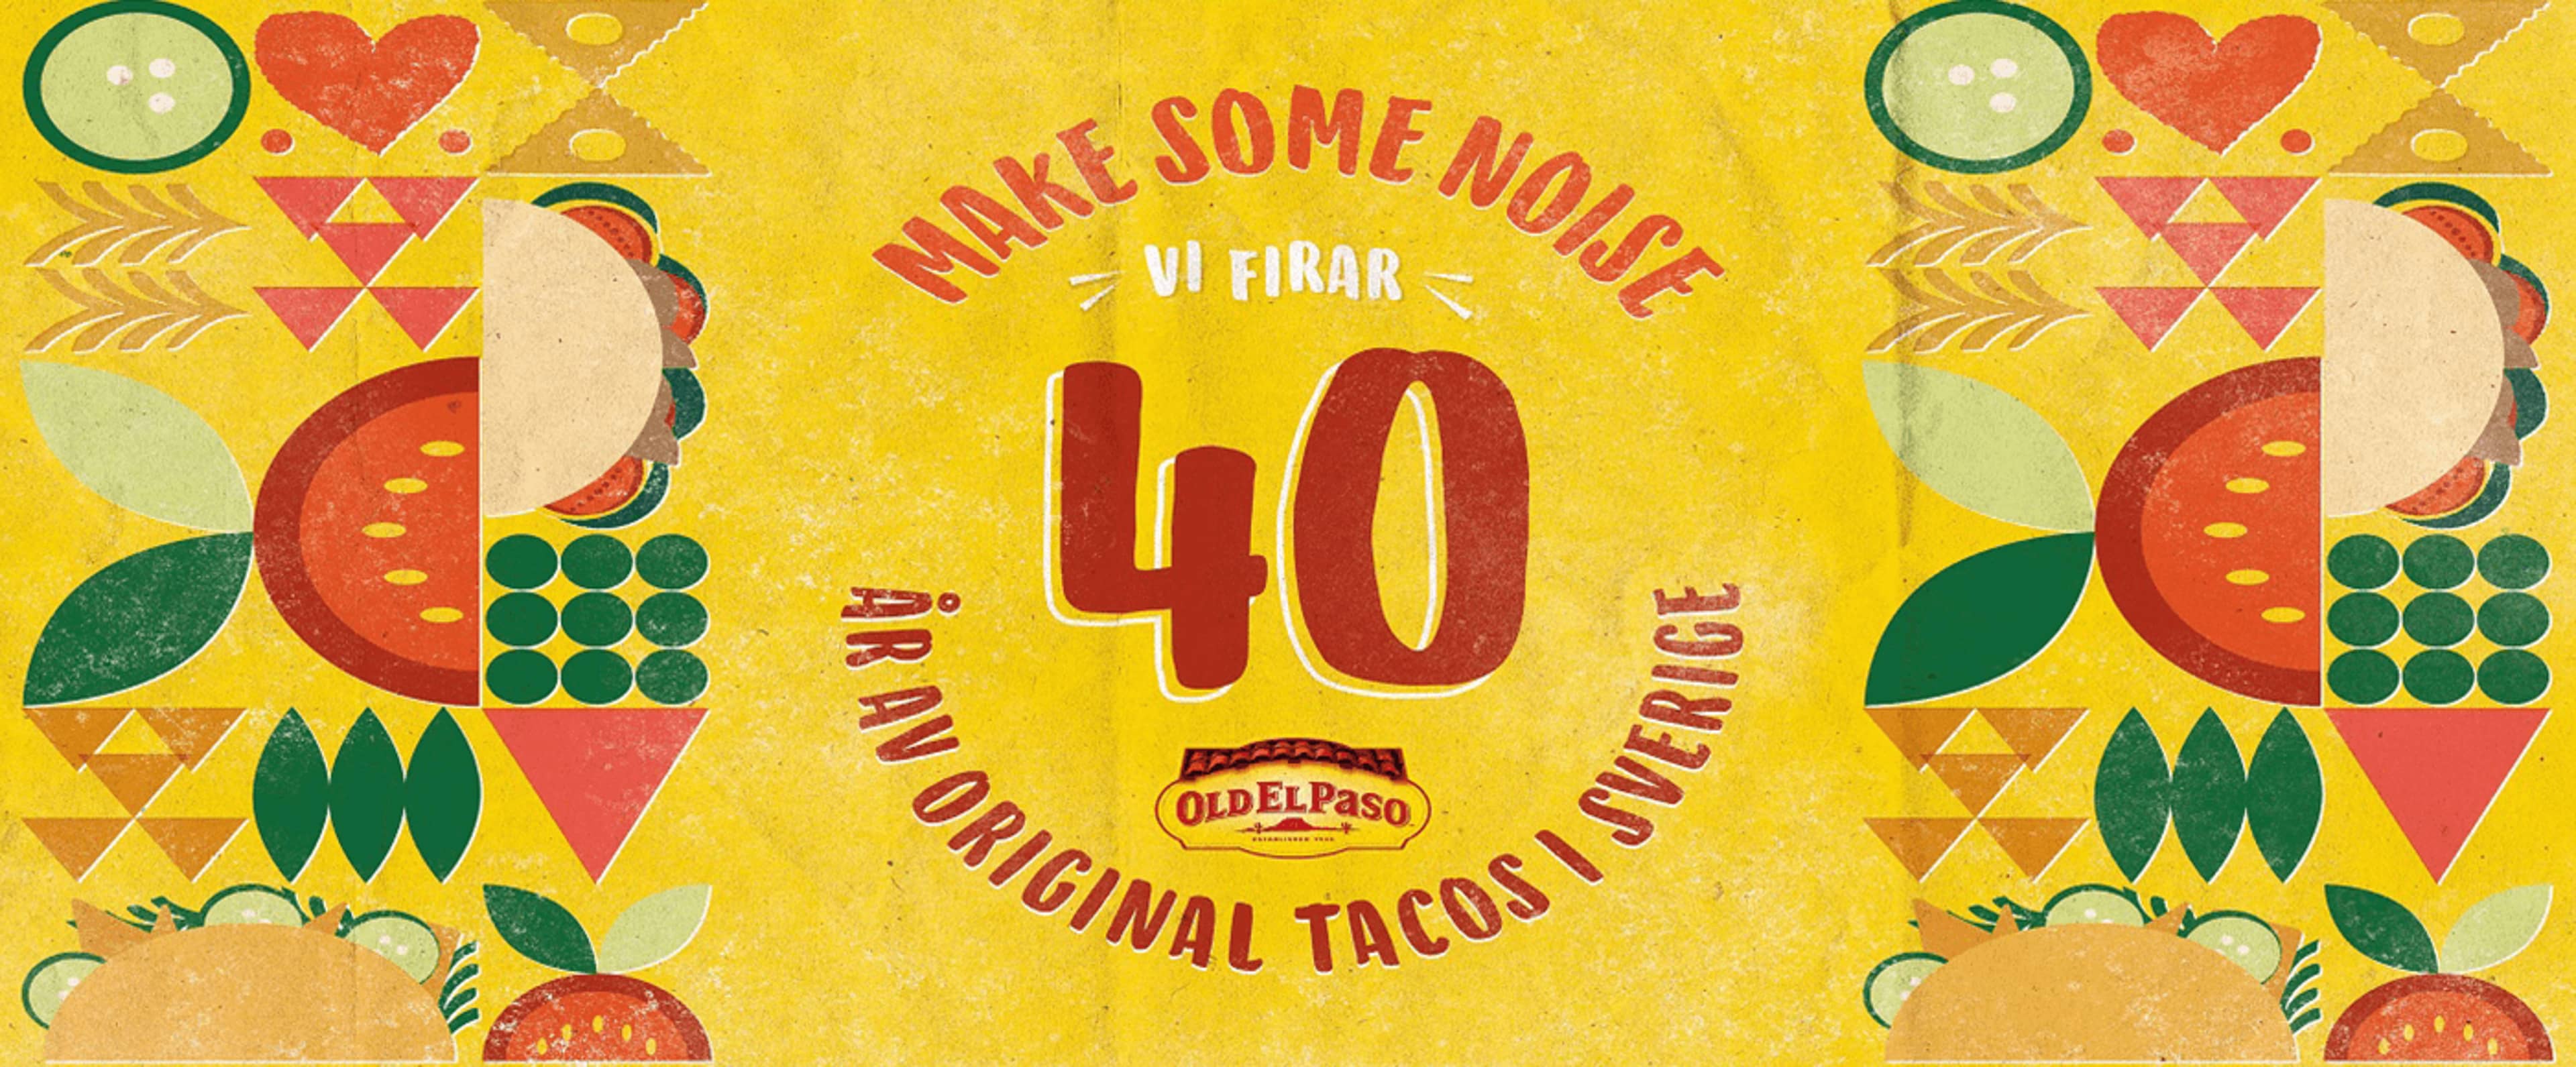 old el paso 40 years celebration banner